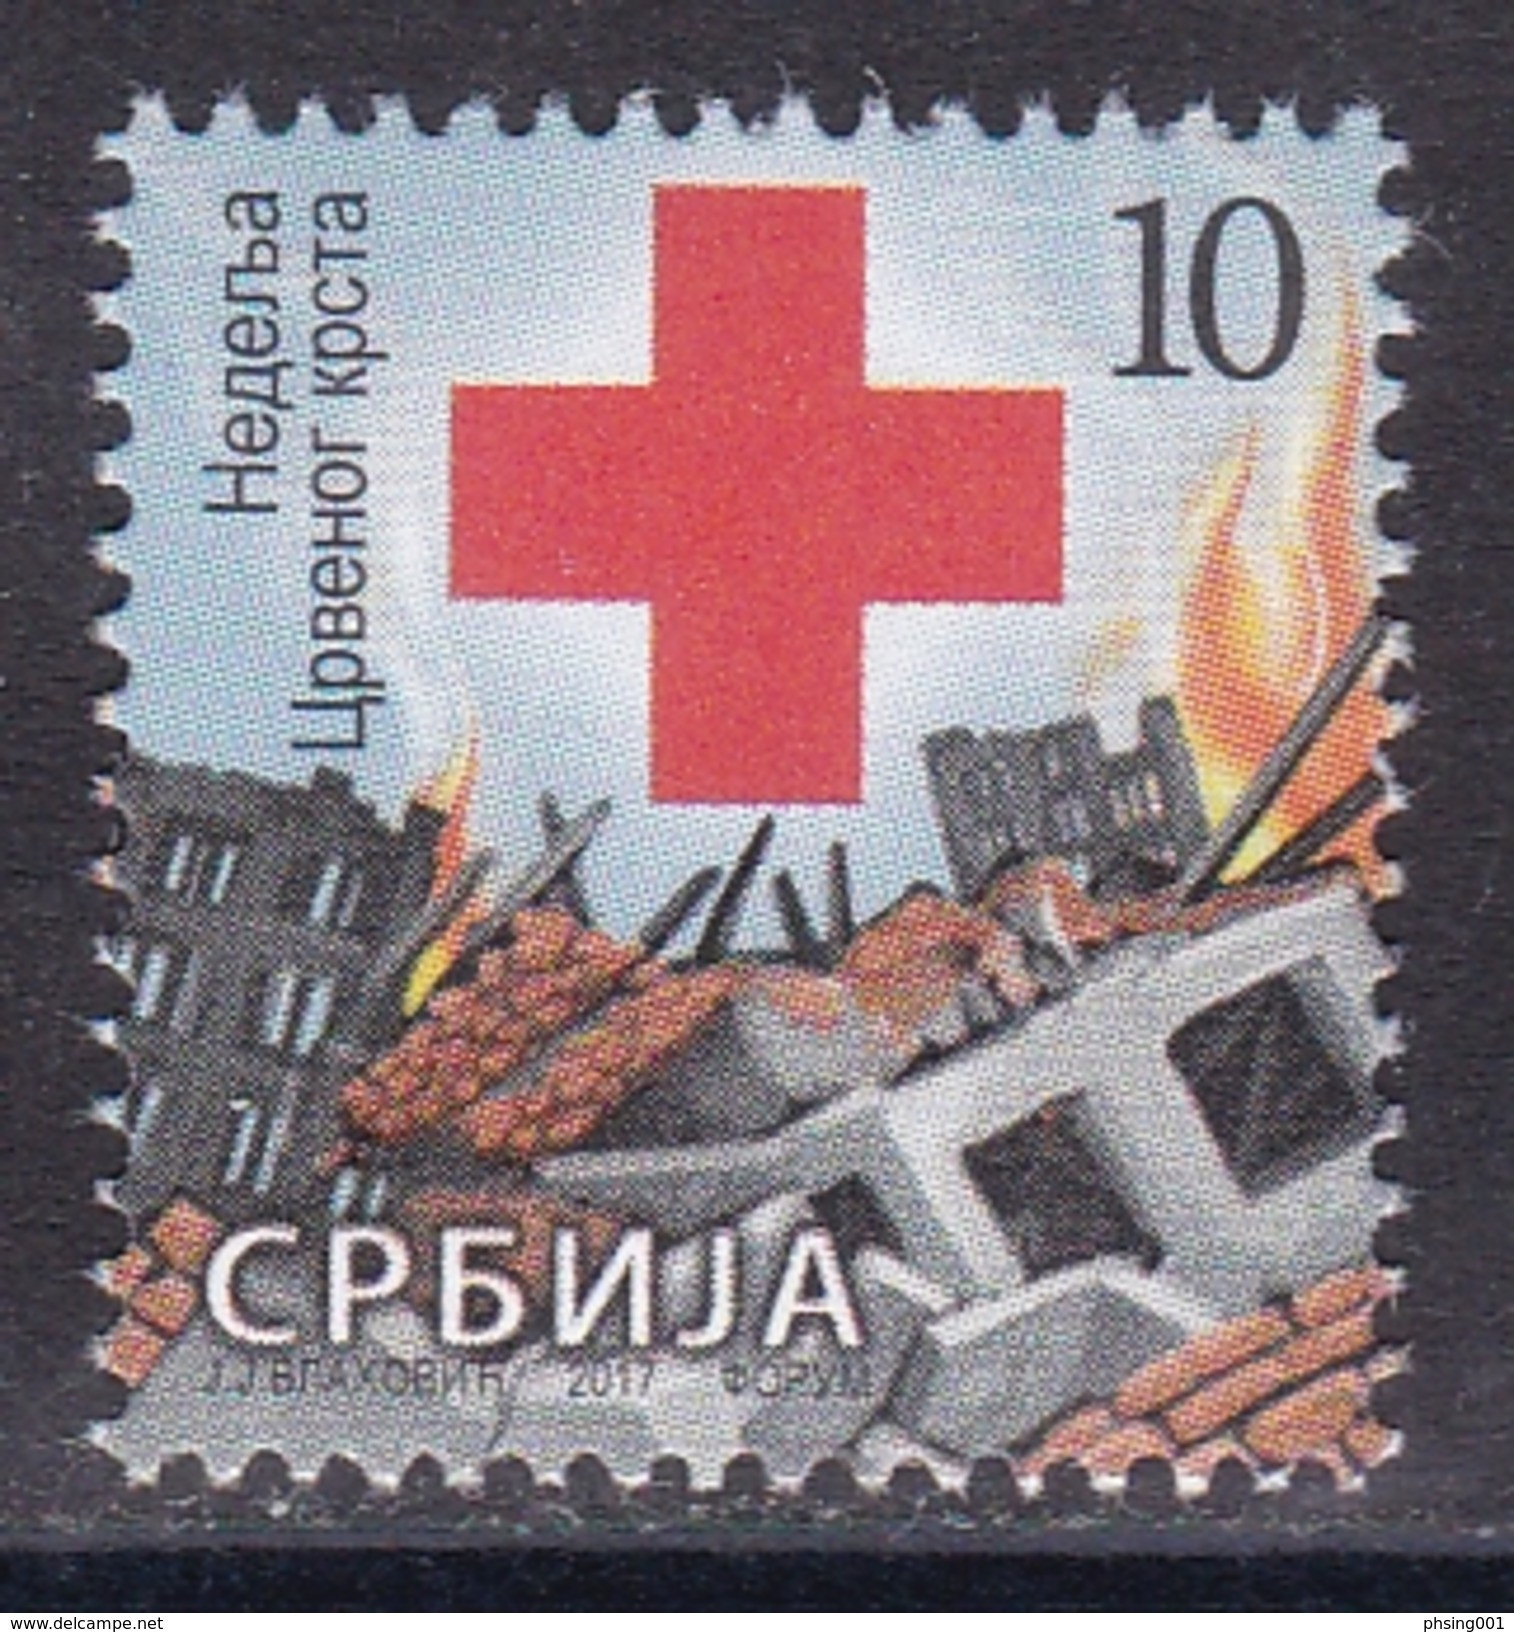 Serbia 2017 Red Cross Rotes Kreuz Croix Rouge, Tax, Charity, Surcharge MNH - Serbia